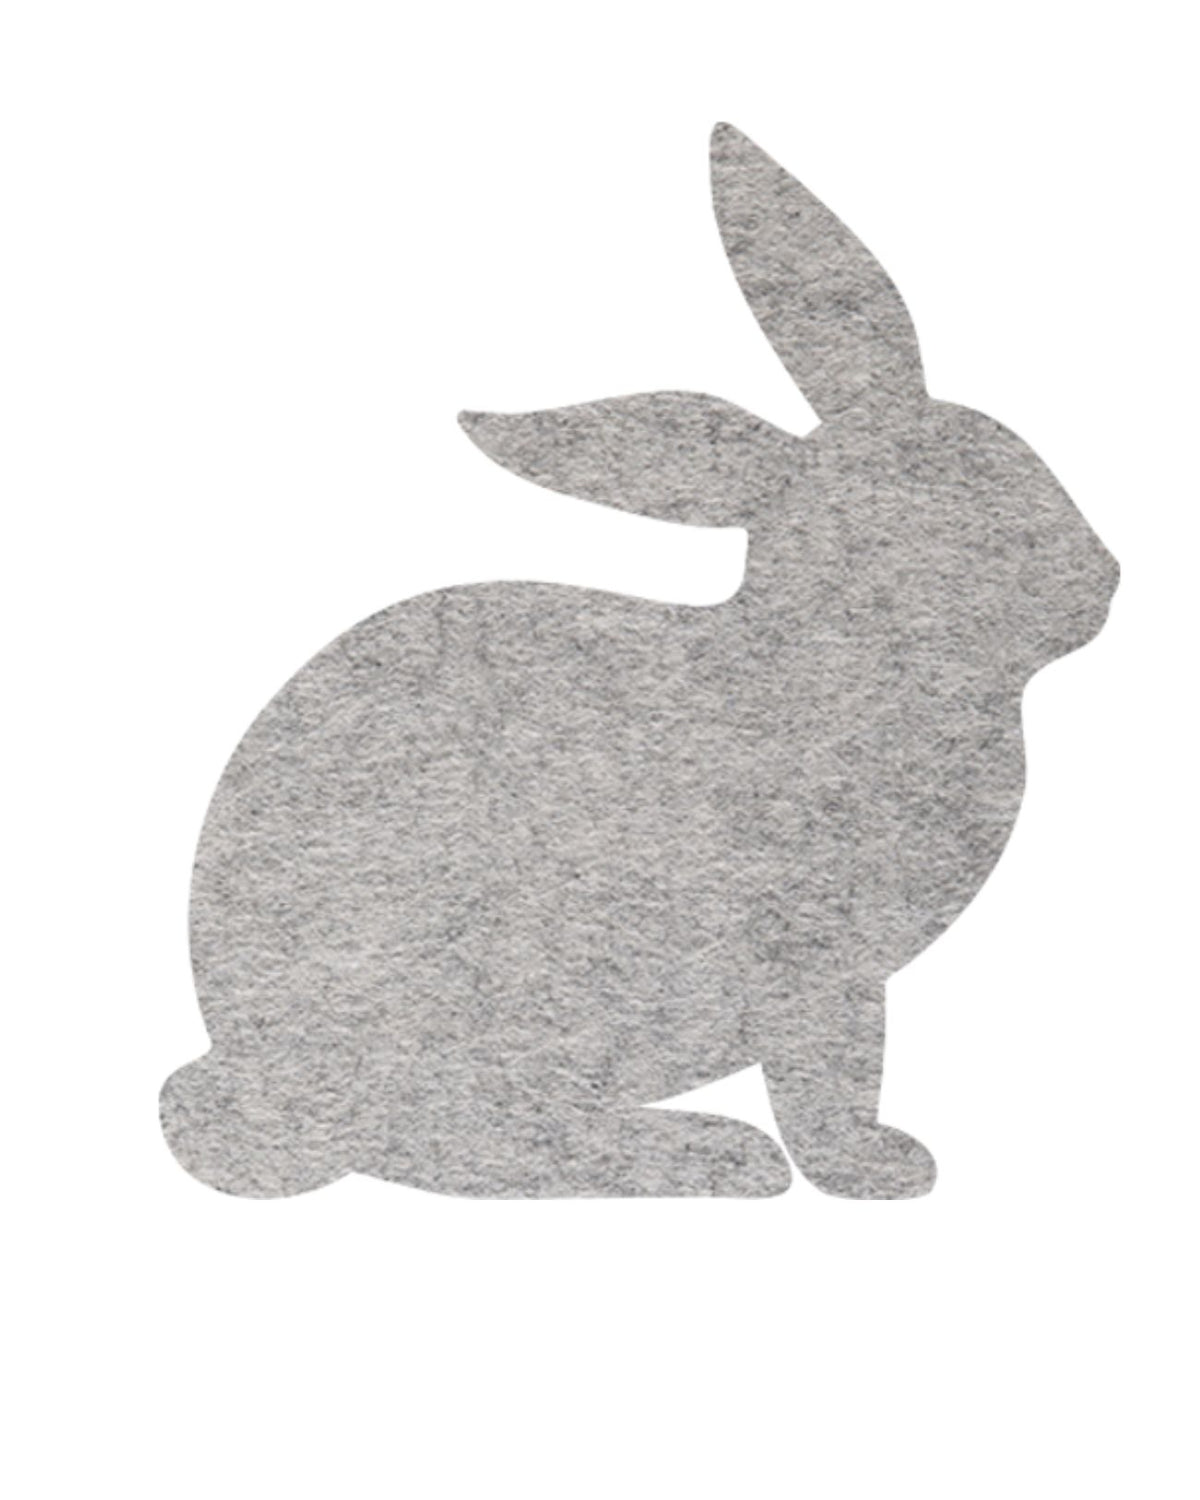 Our grey Bunny Wall Decor have a beautiful felt-like appearance, and they are amazing to touch as well as visually appealing in all living spaces. They come with easy peel and stick tabs for your wall, making them ready to enjoy straight away. Perfect for a kids bedroom or to deck out a nursery.